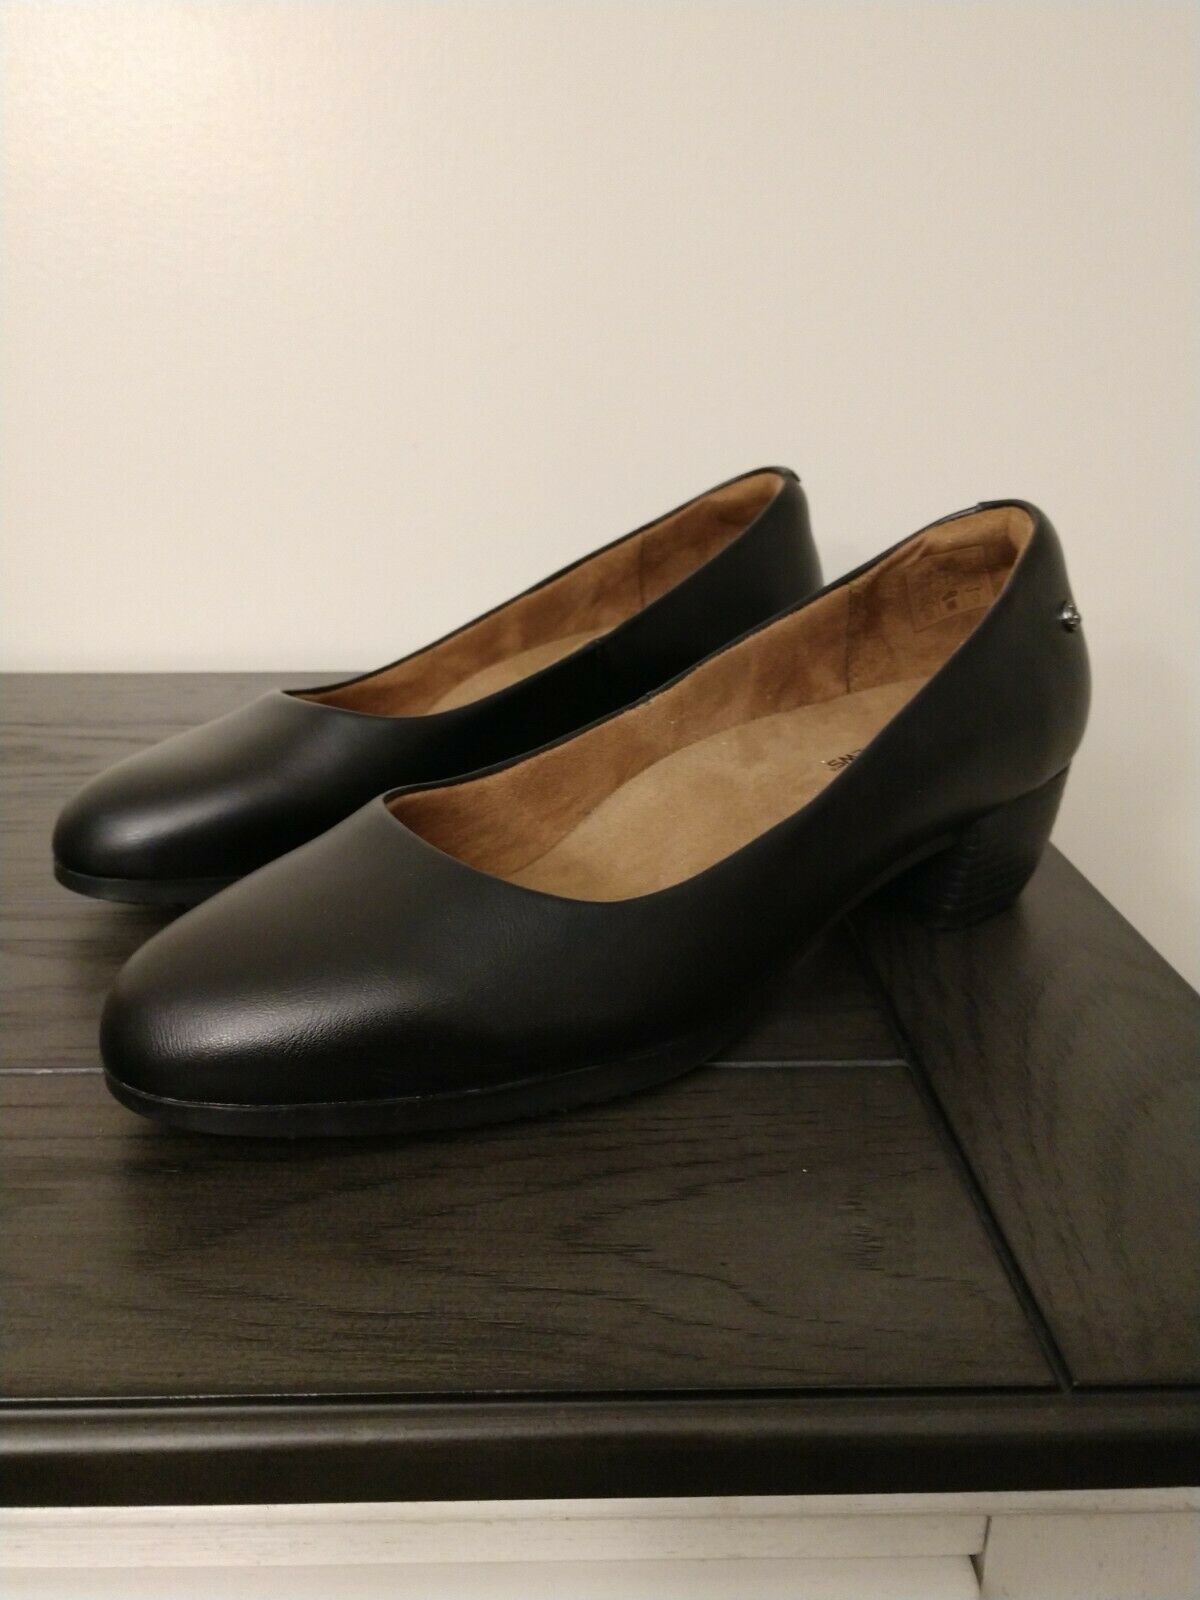 Shoes for Crews Women’s Dress/Casual Shoes Size 11 Black Low-Block Heel - EXC